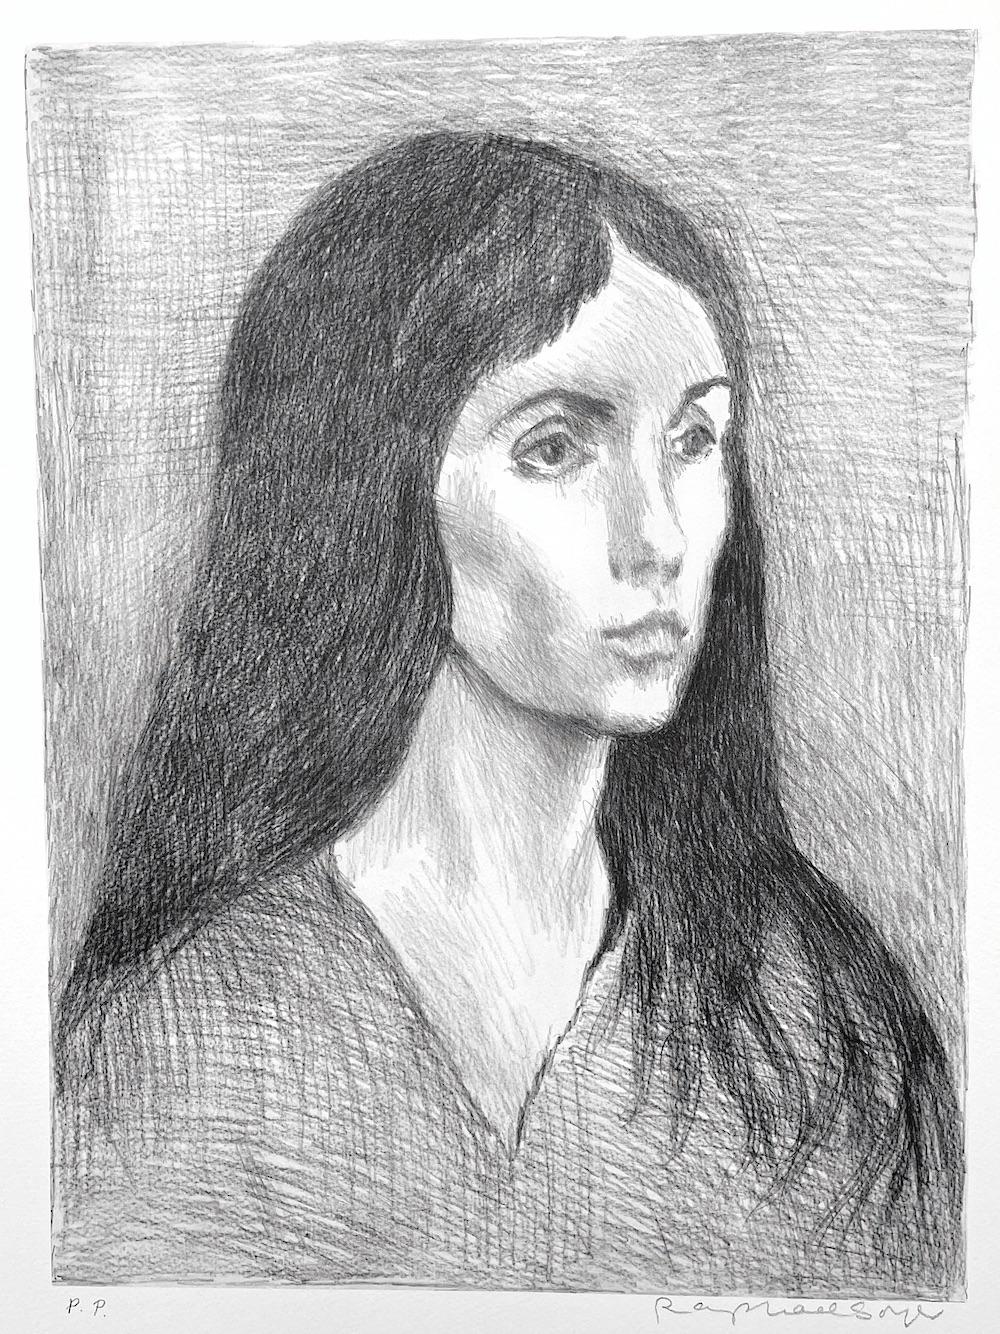 WOMAN LONG DARK HAIR Signed Lithograph, Female Portrait, V-Neck Top, Realism - Print by Raphael Soyer